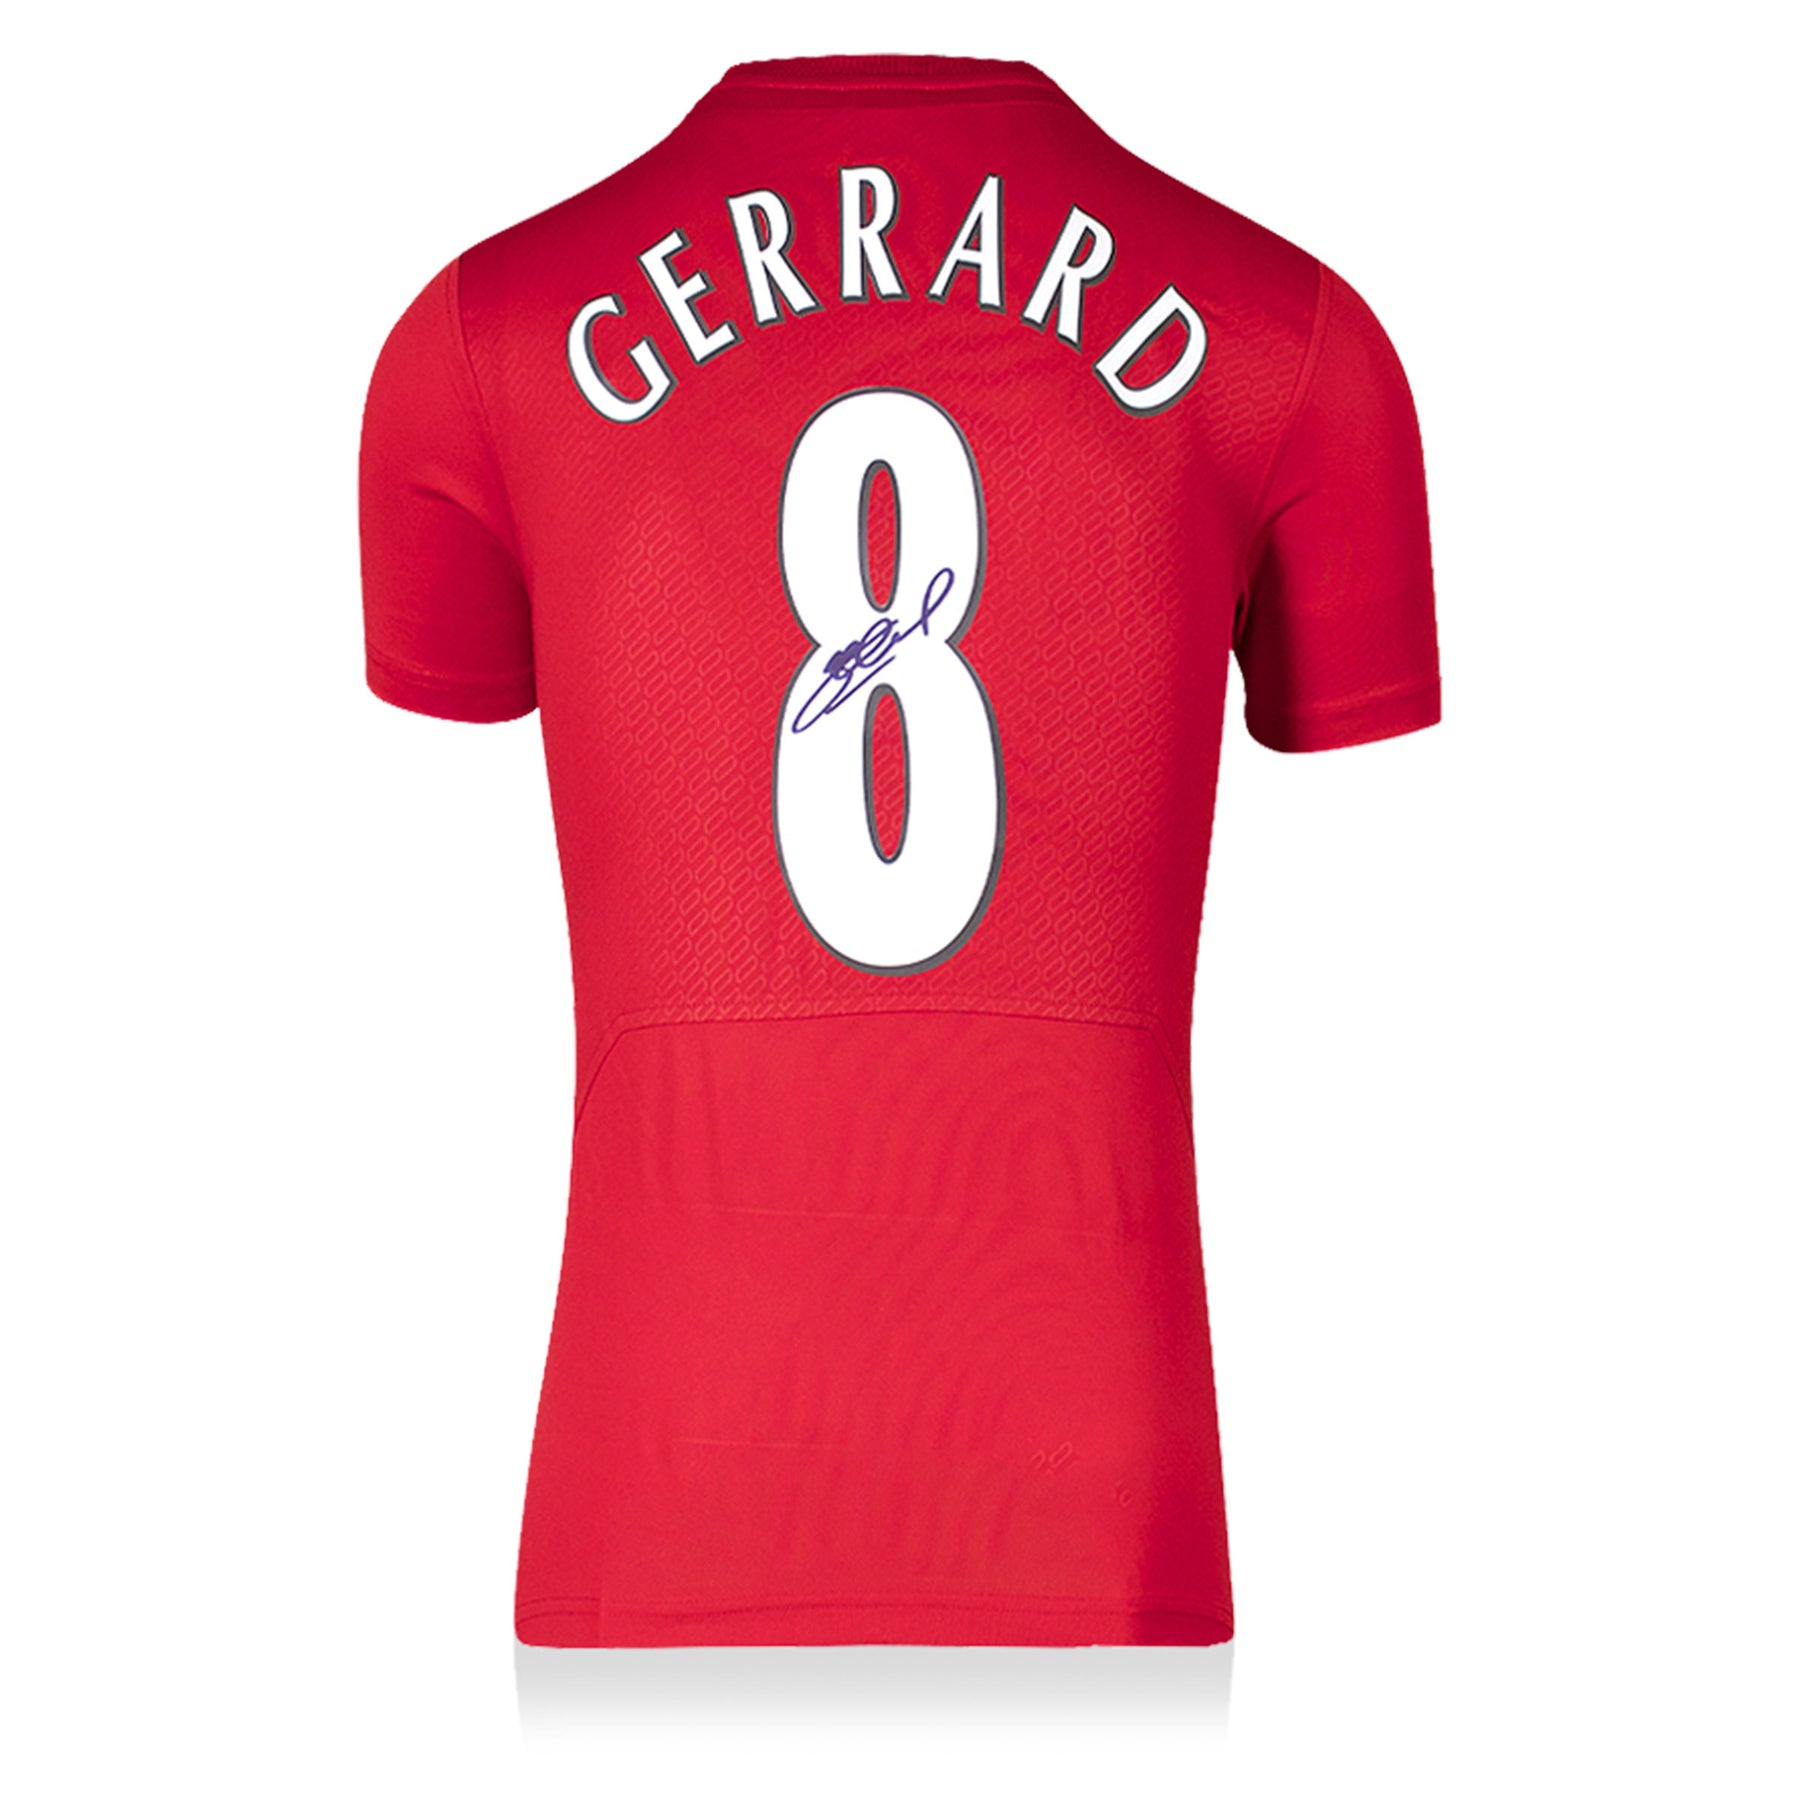 Steven Gerrard Liverpool 2005 Home Shirt With Back Signed (UEFA Champions League Final Edition)